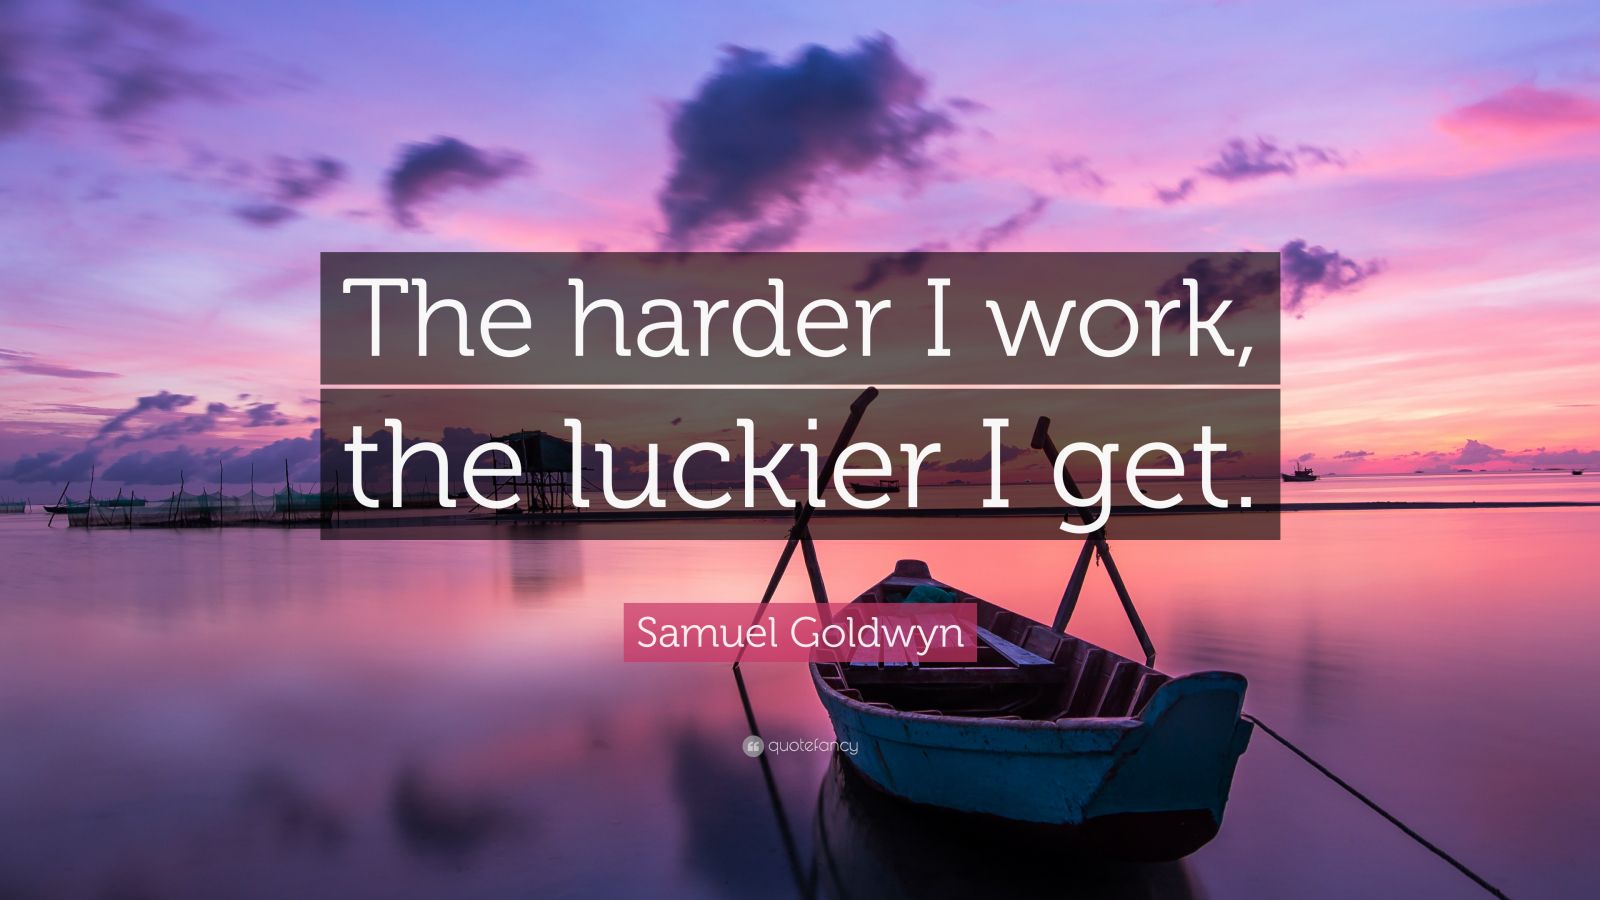 Samuel Goldwyn Quote: “The harder I work, the luckier I get.” (12 ...